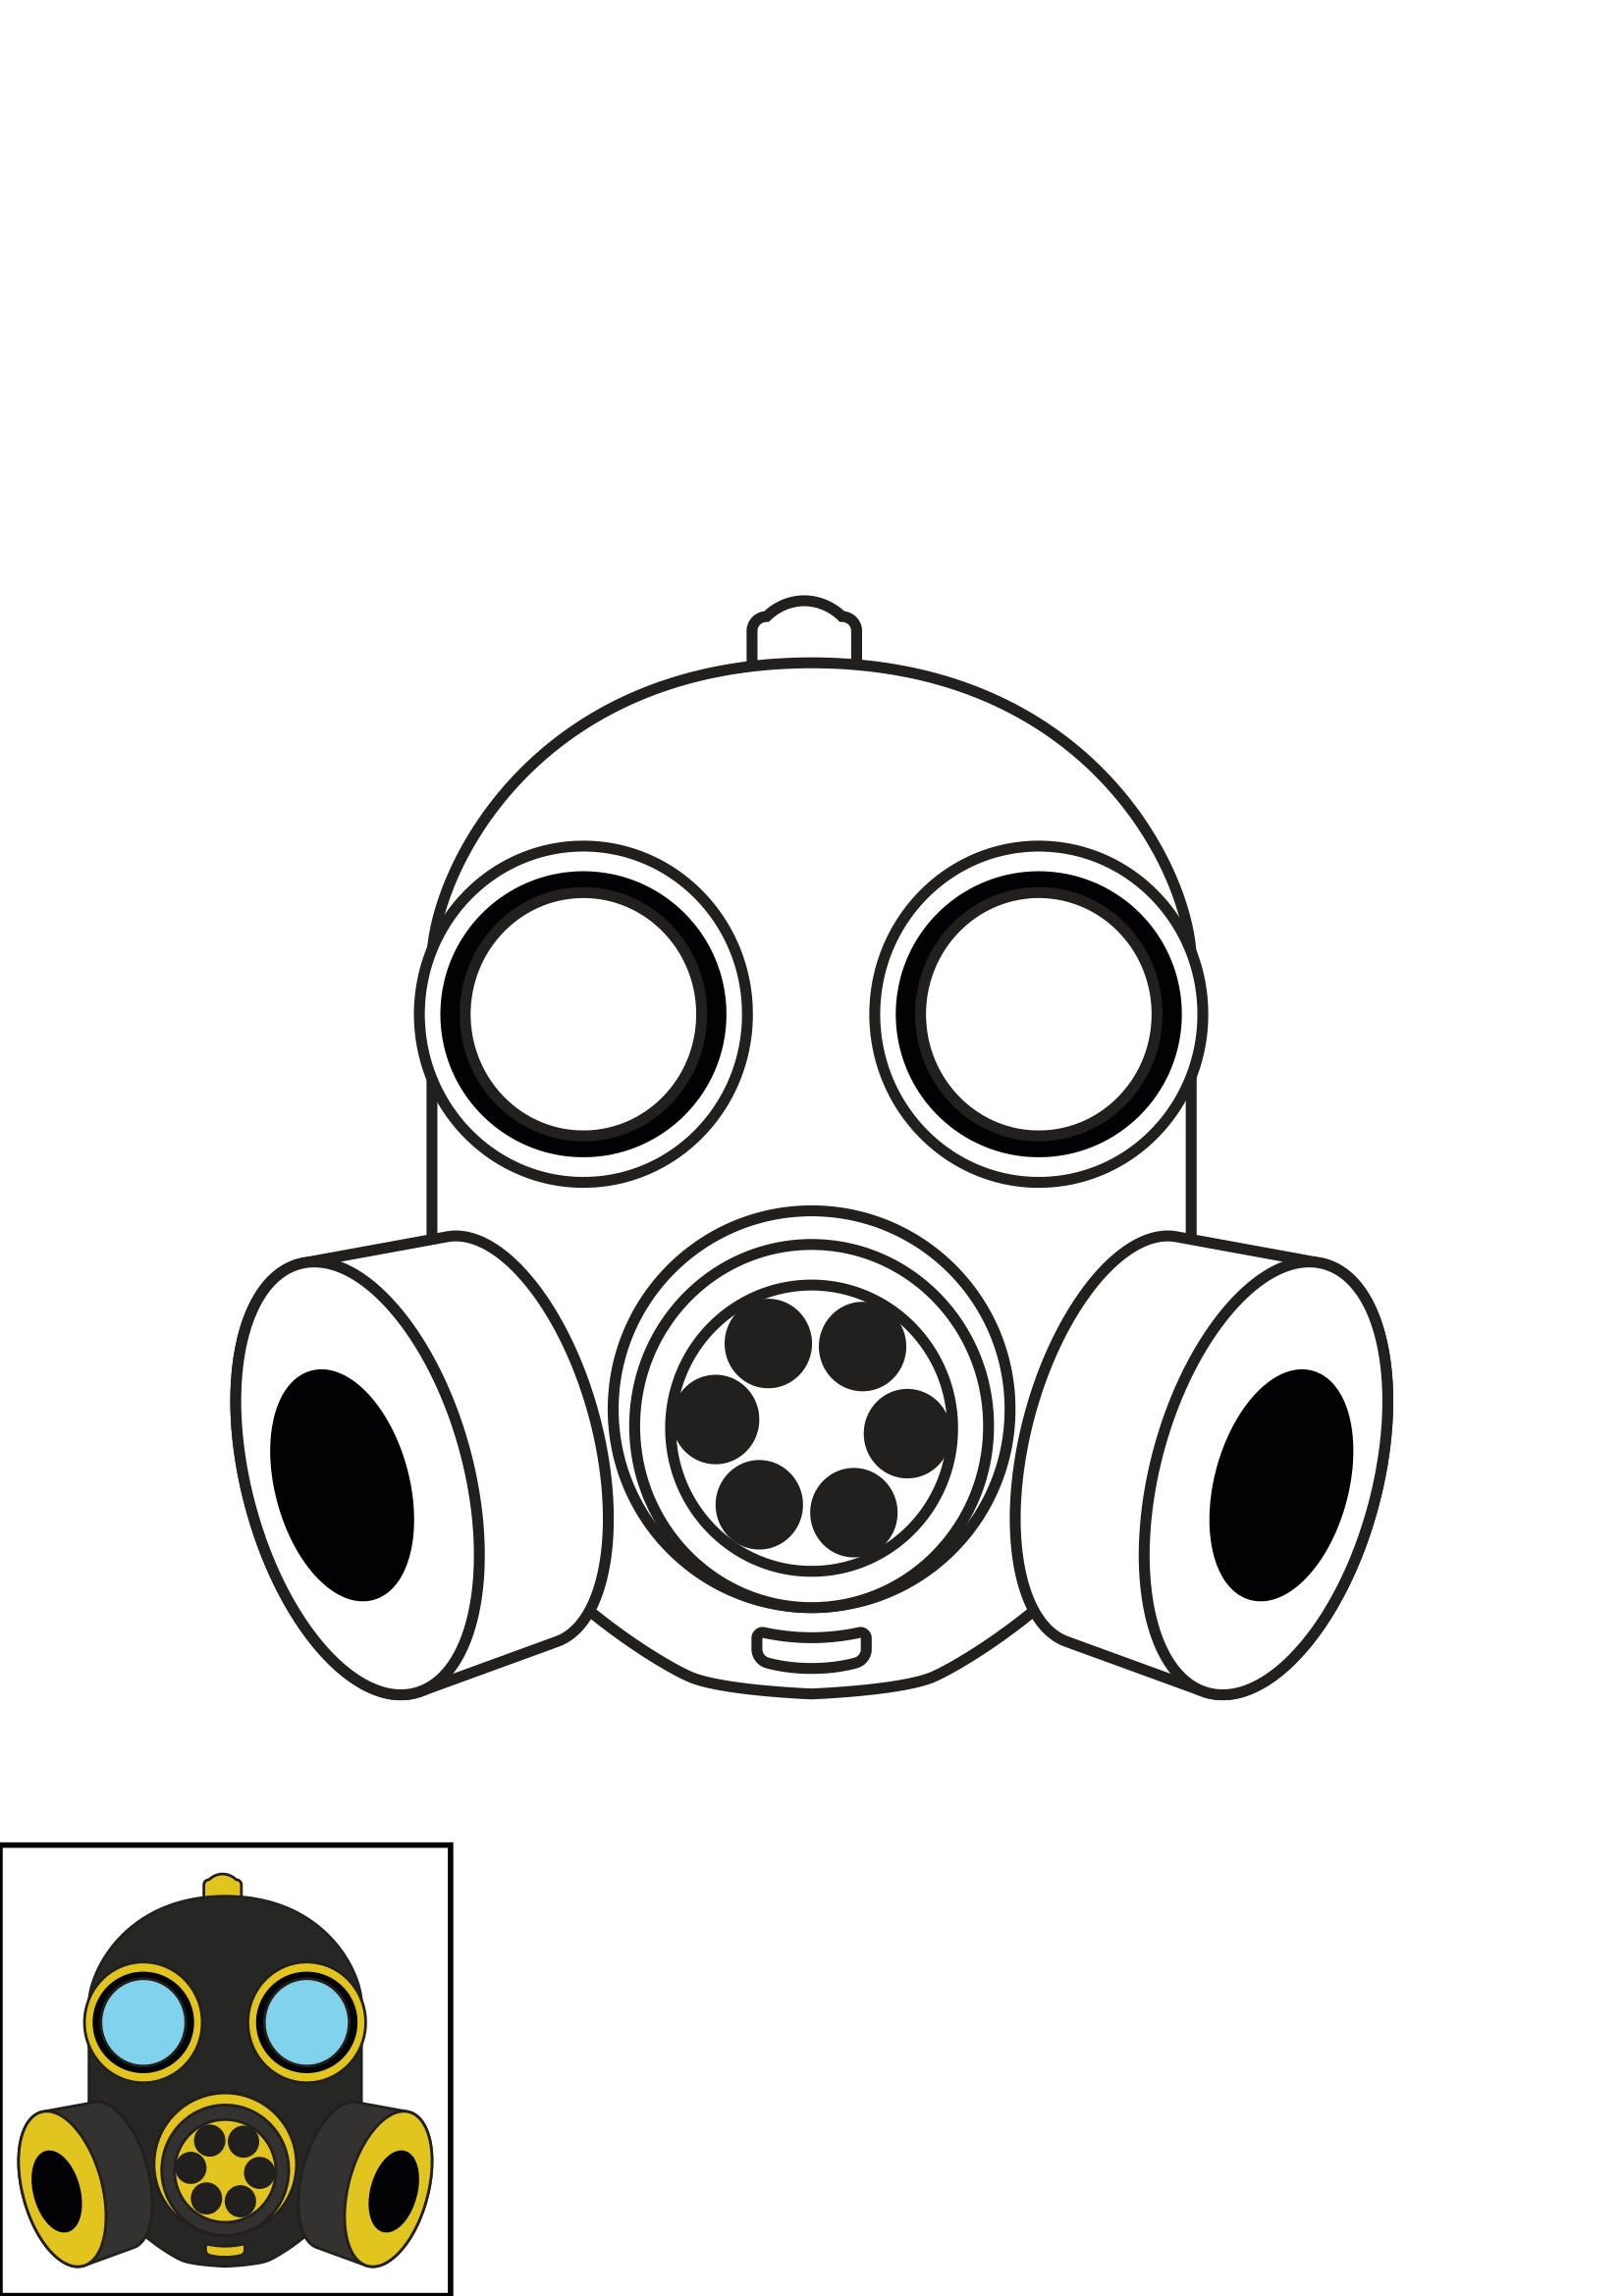 How to Draw A Gas Mask Step by Step Printable Color